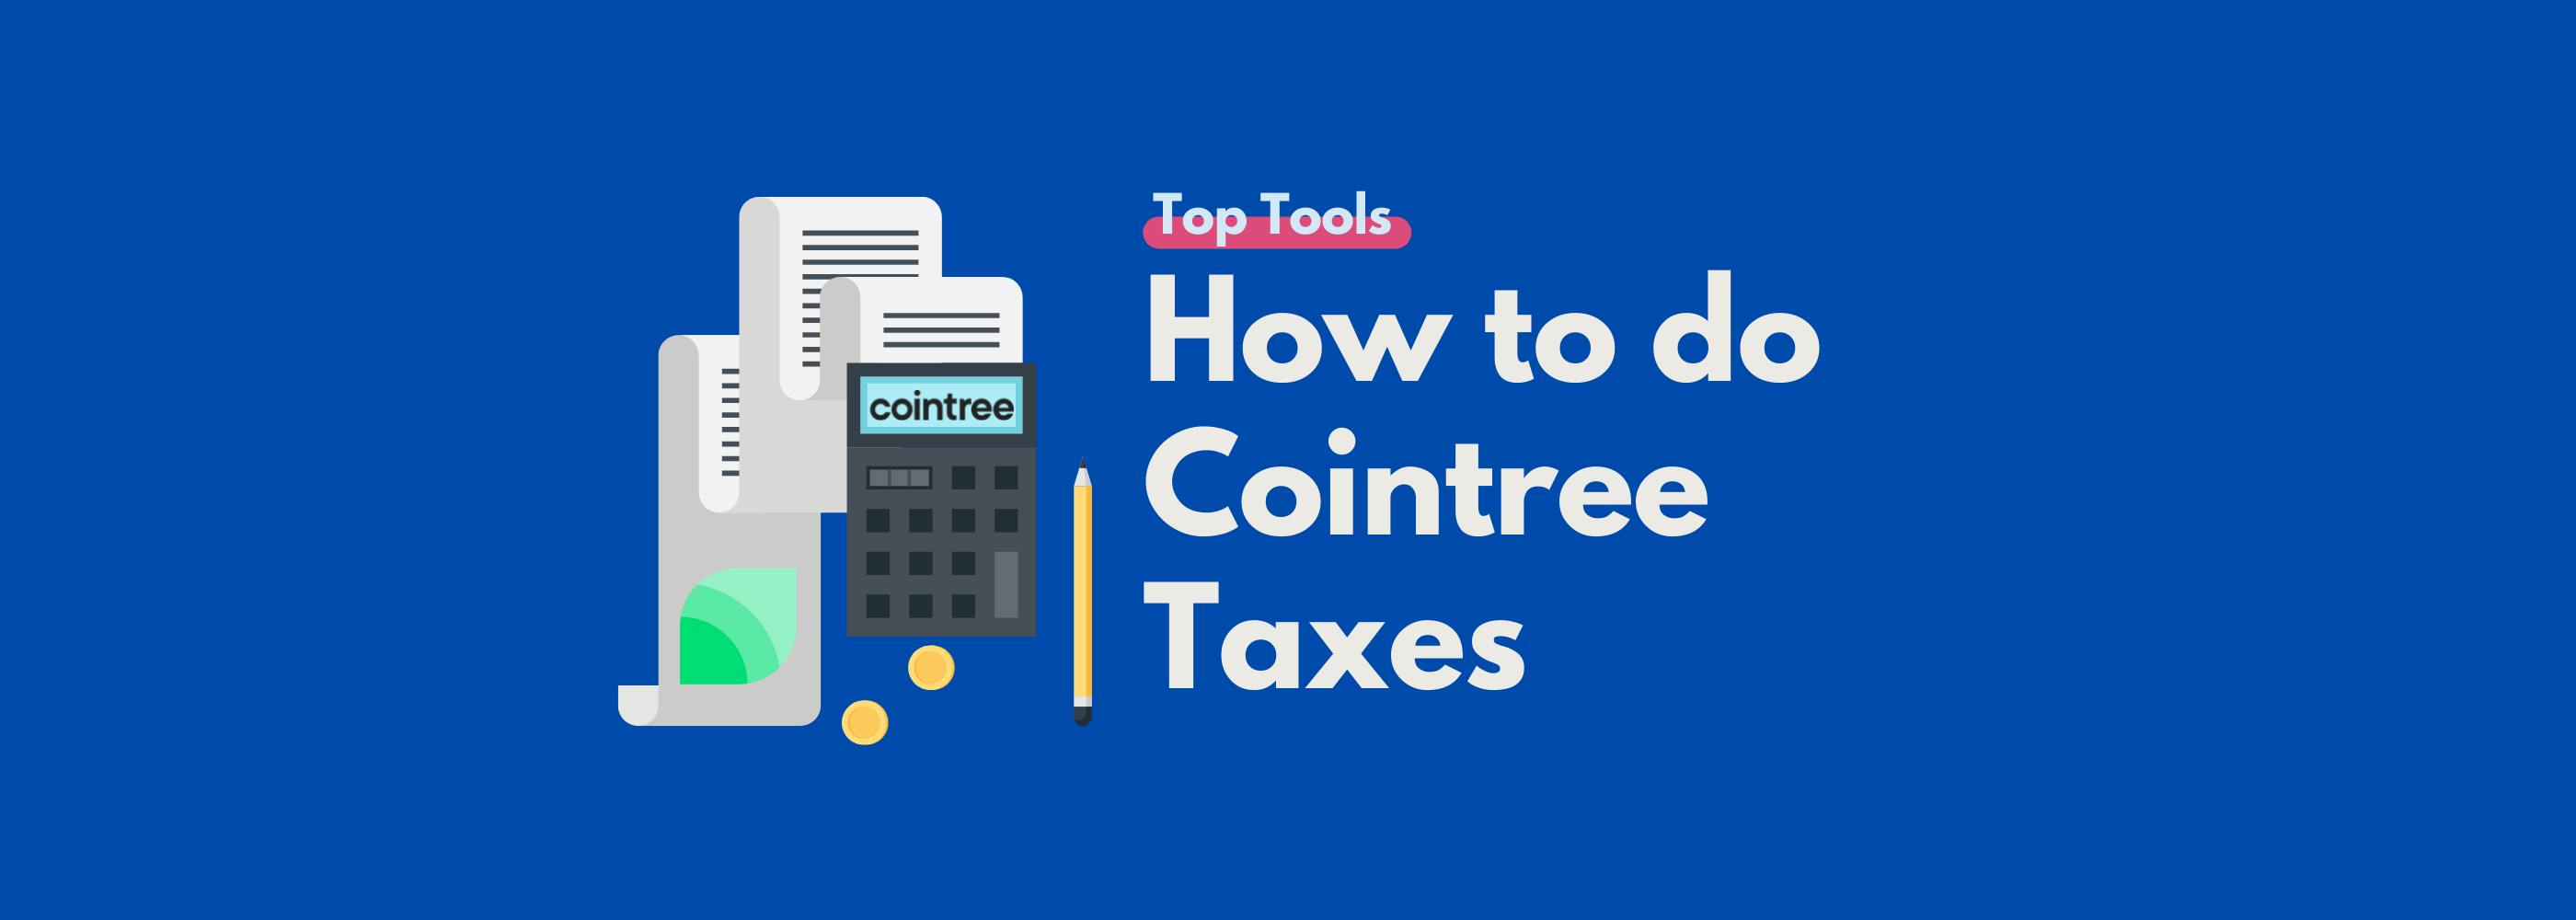 Cointree Tax Guide